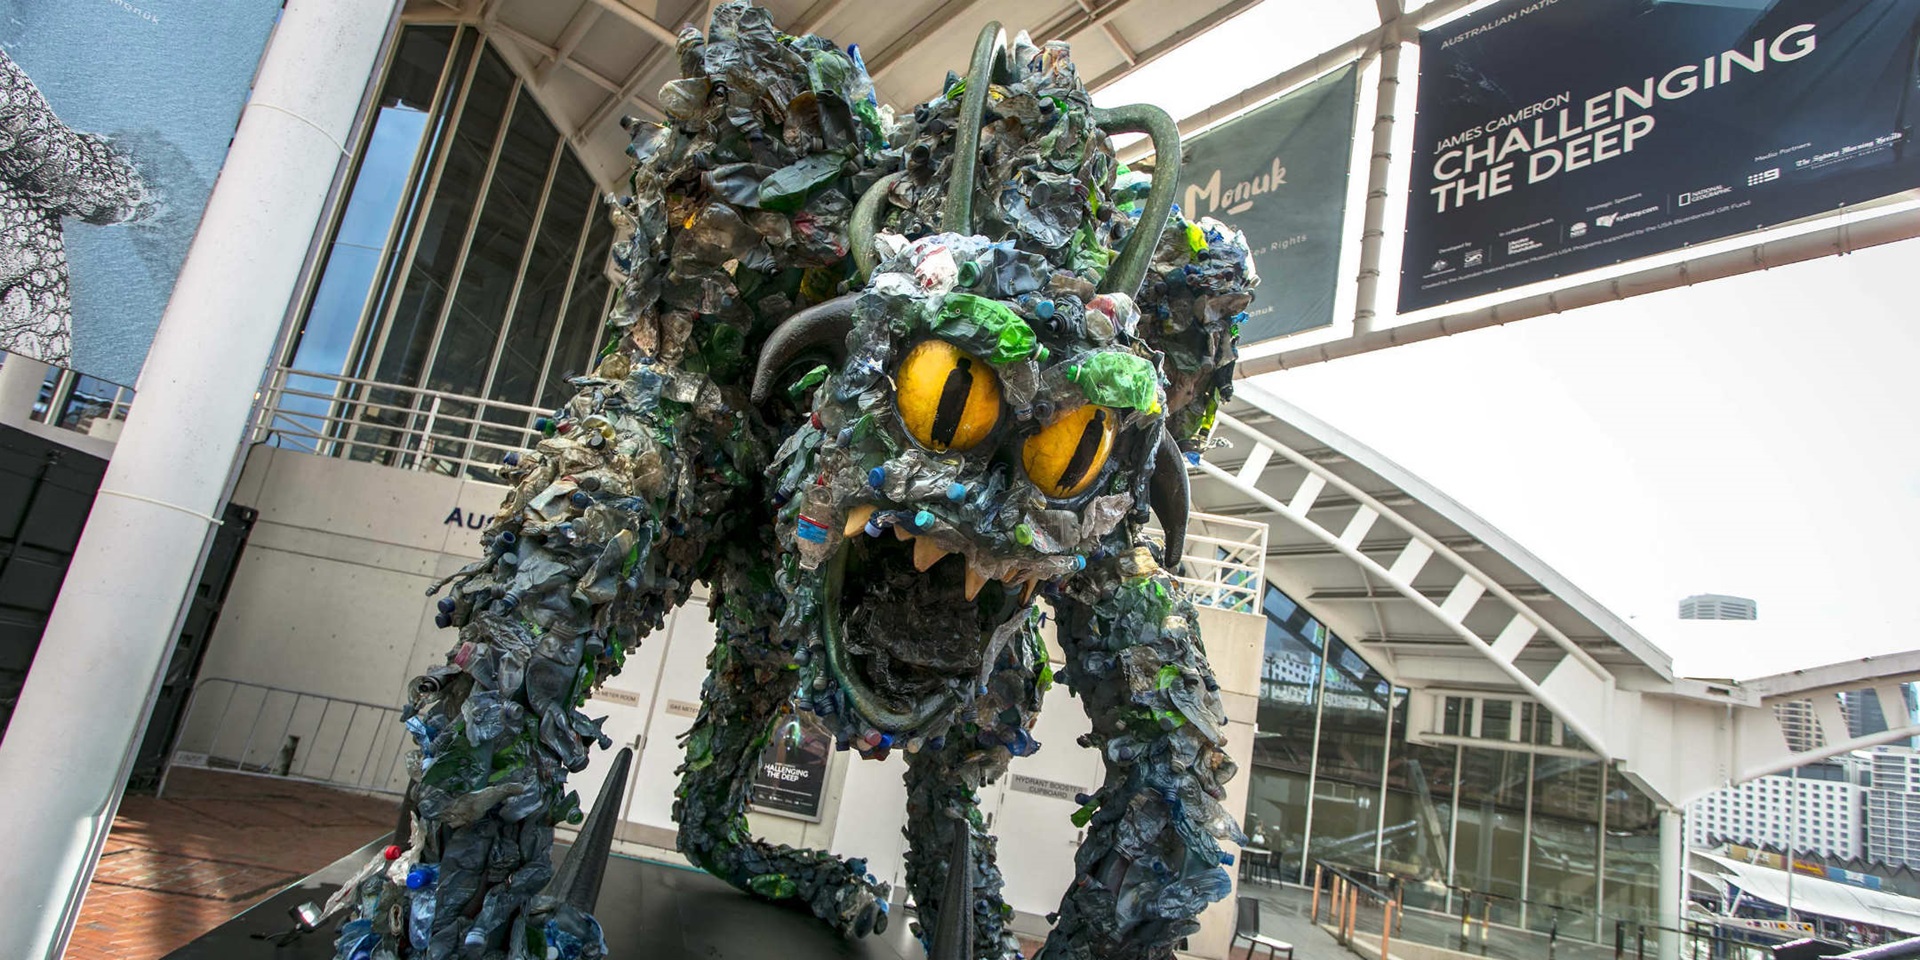 “The Beast” made from 2,400 recycled plastic bottles and towering over at close to 4 meters high